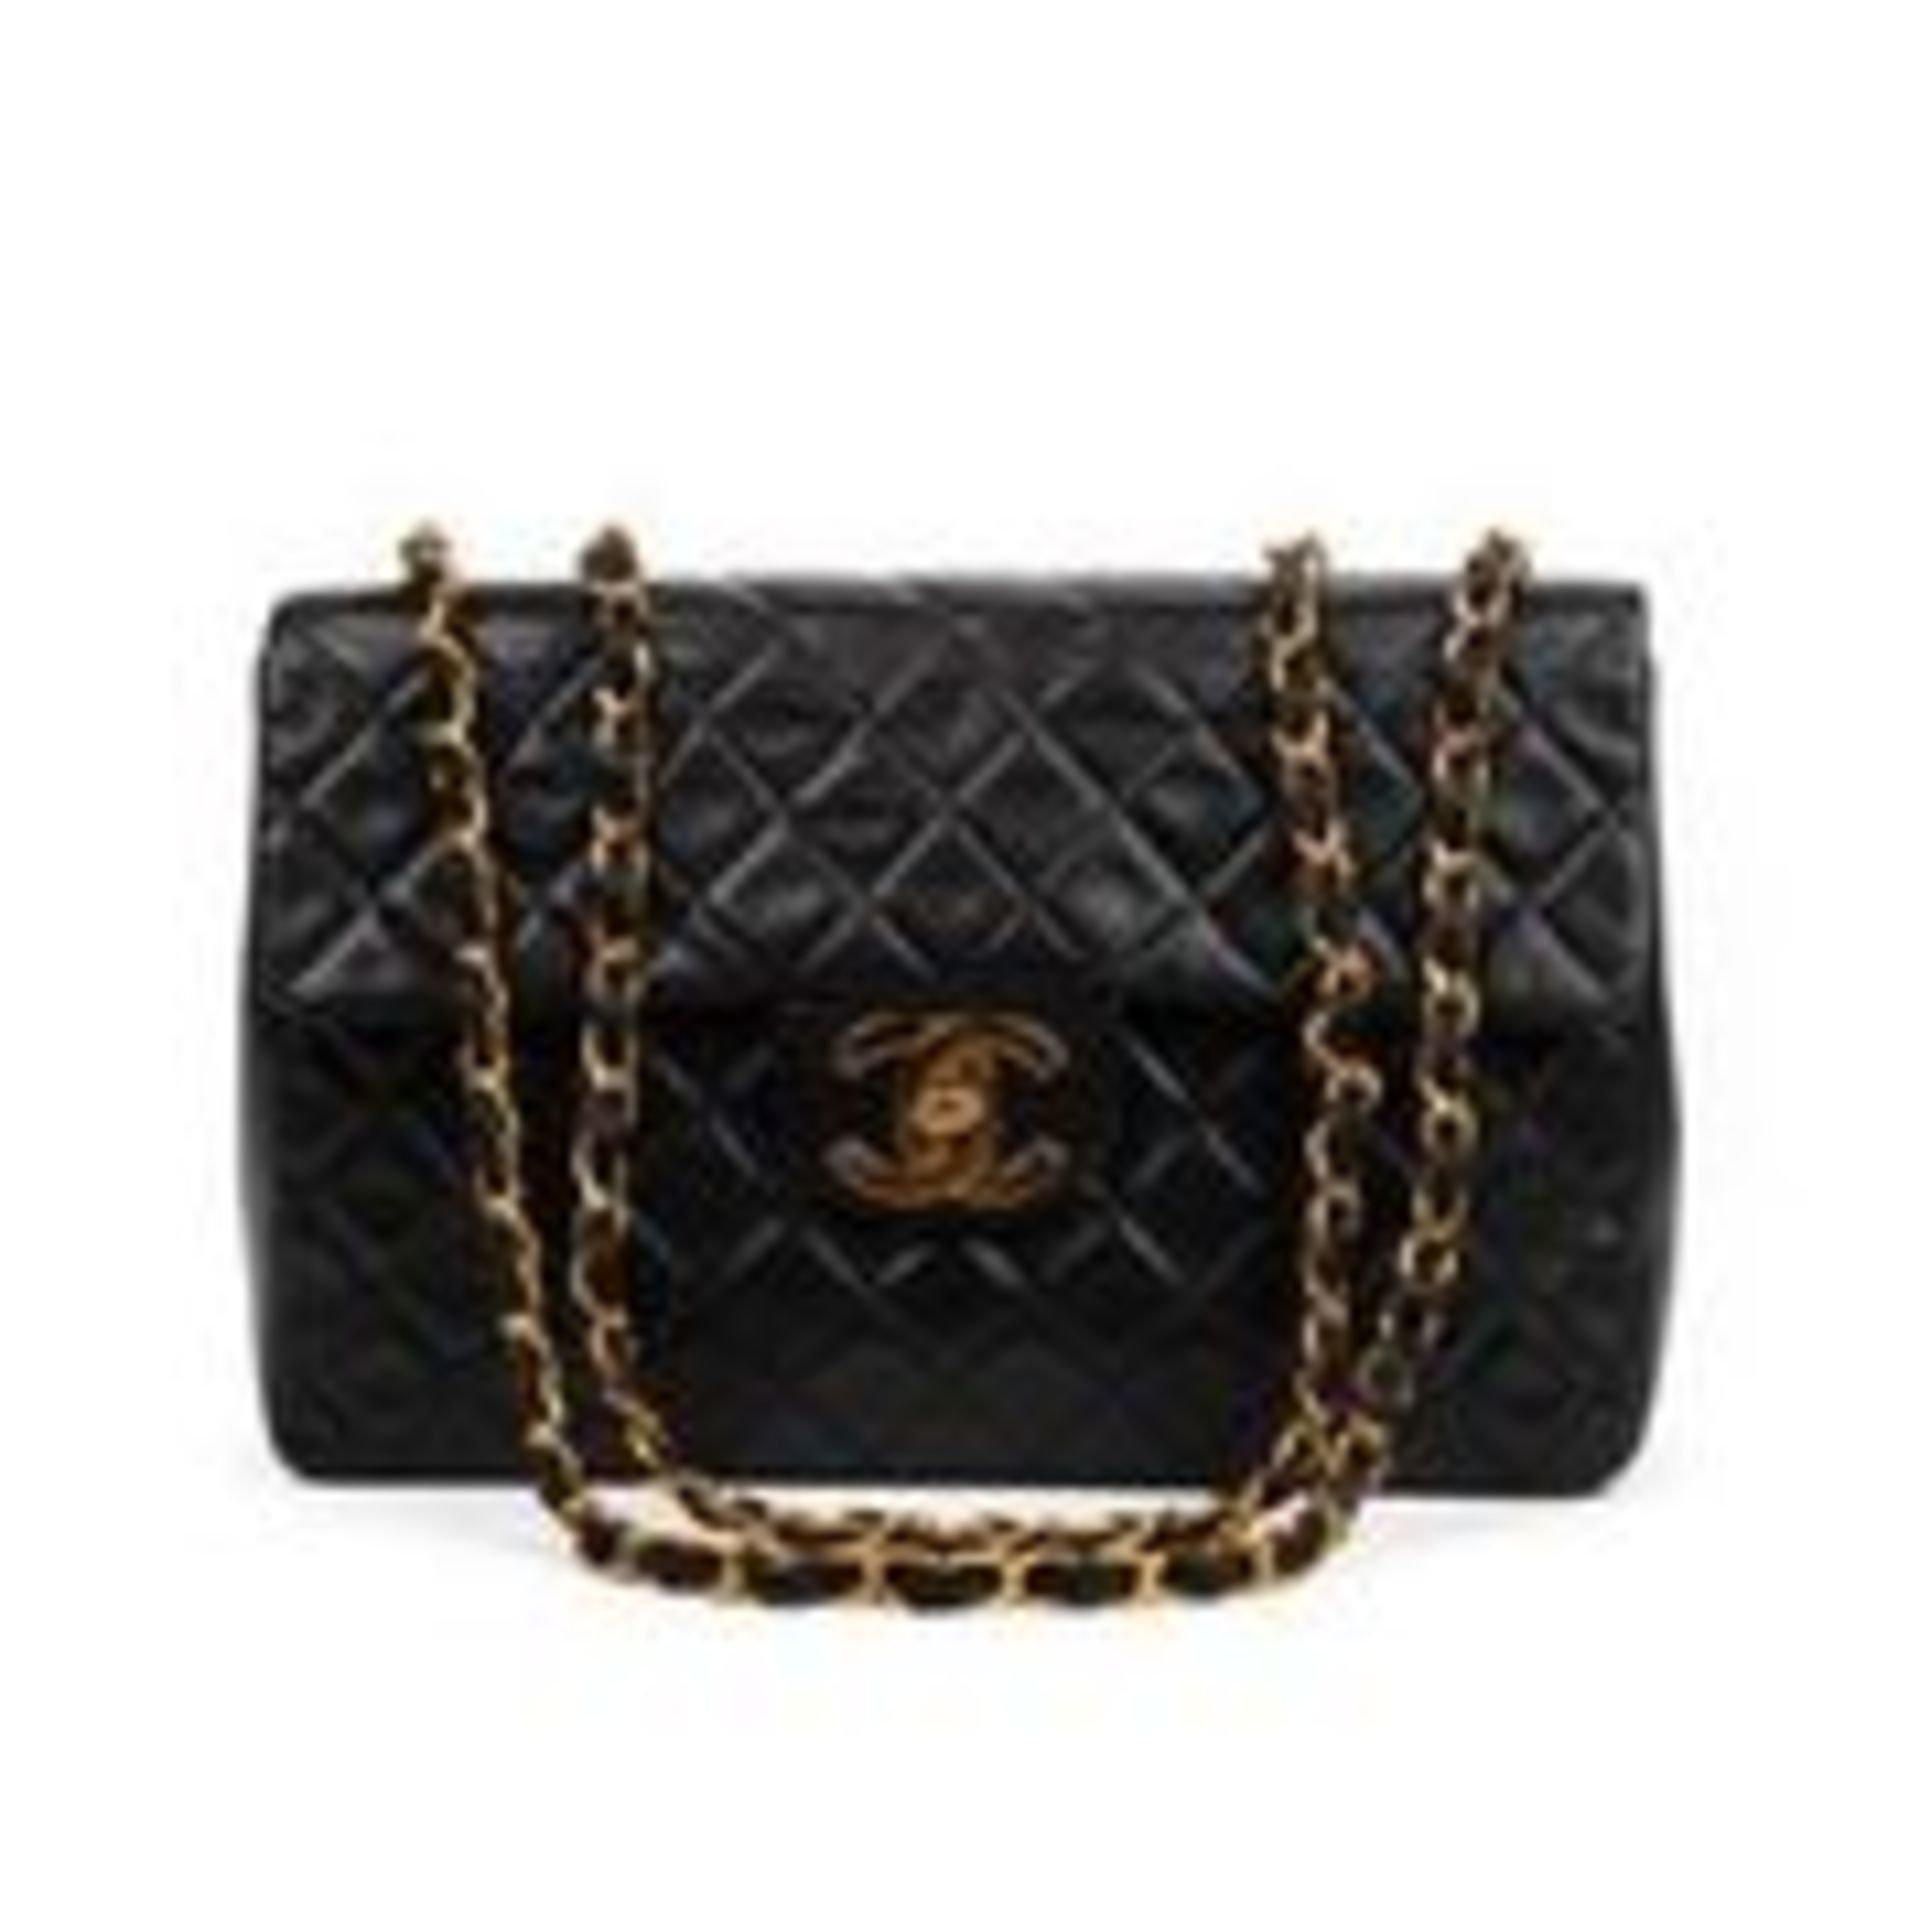 RRP £5350 Chanel Classic Flap Shoulder Bag in Black - EAG4447 - Grade AB Please Contact Us - Image 2 of 5